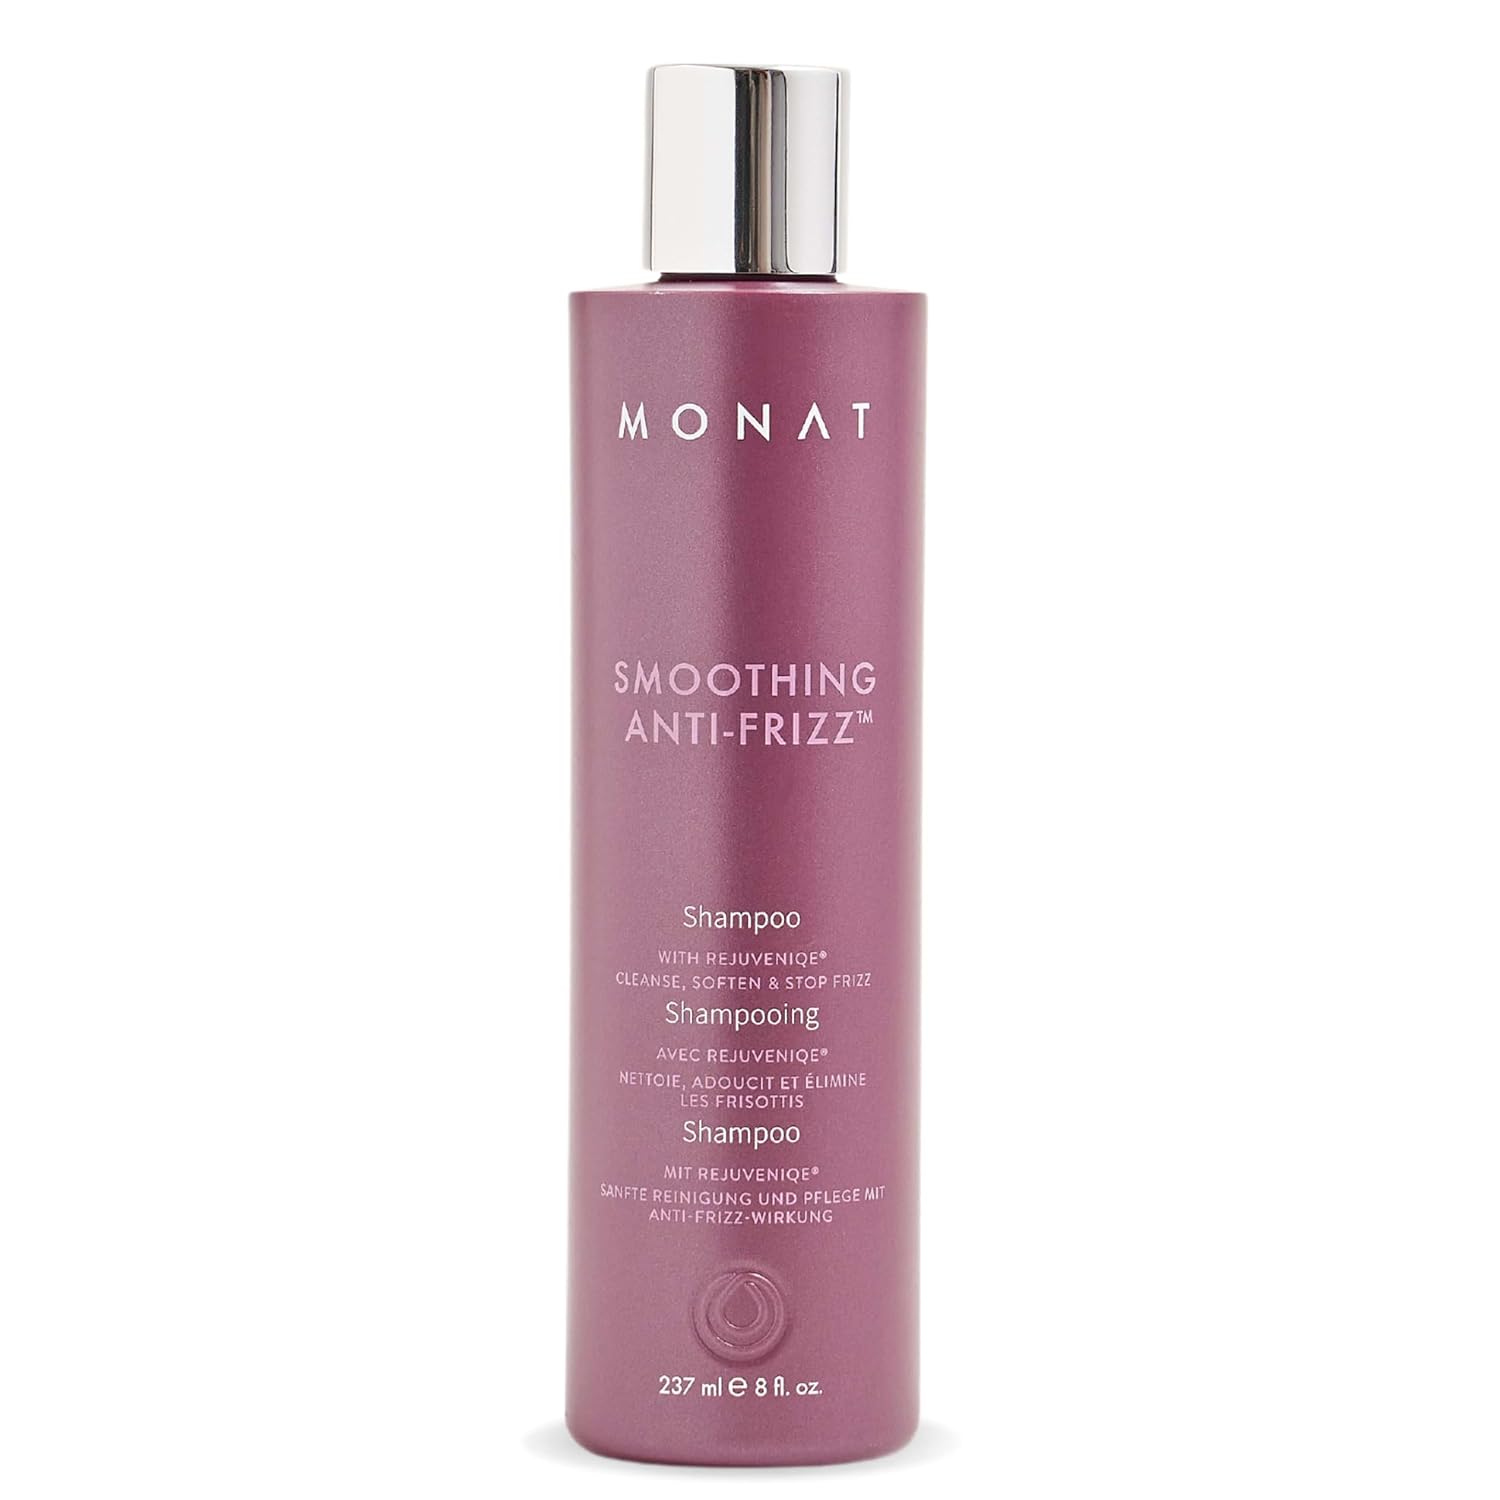 MONAT Smoothing Anti-Frizz™ Shampoo - Humidity Protection, Frizz Control with REJUVENIQE® & Tropical Butters, Velvety Fragrance, 237 ml (8 fl. oz.)